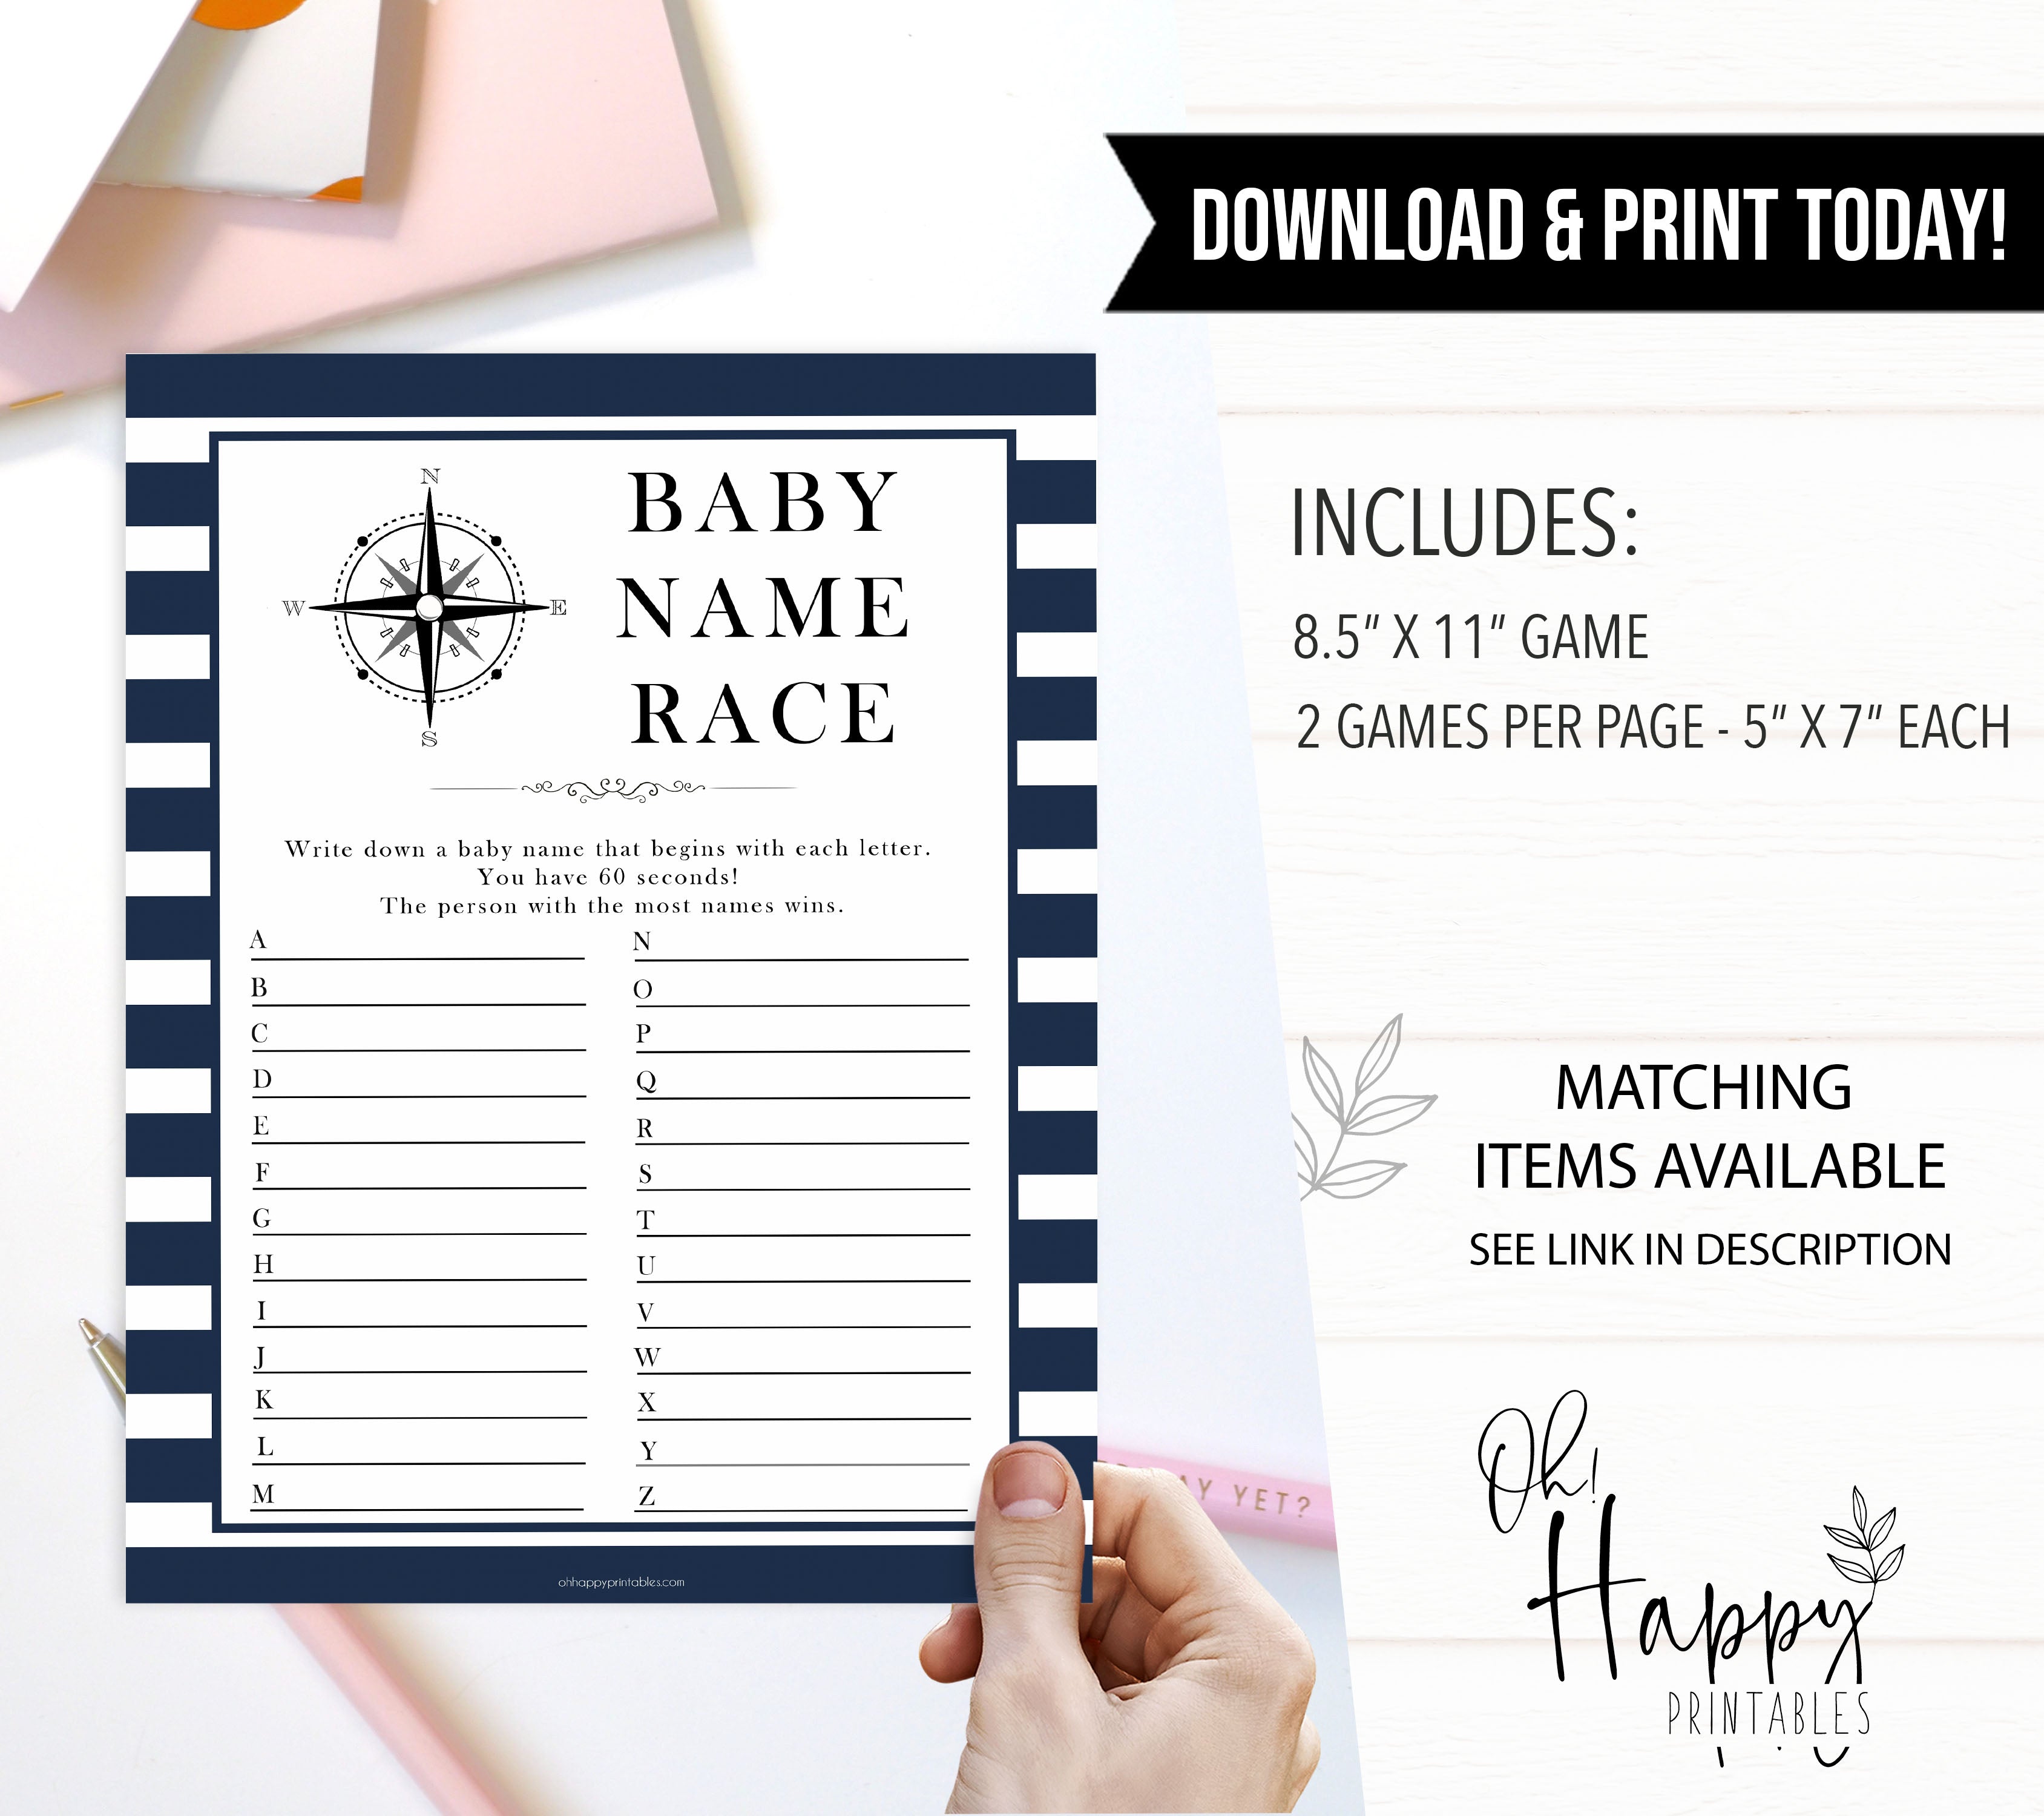 Nautical baby shower games, baby name race baby shower games, printable baby shower games, baby shower games, fun baby games, popular baby shower games, sailor baby games, boat baby games